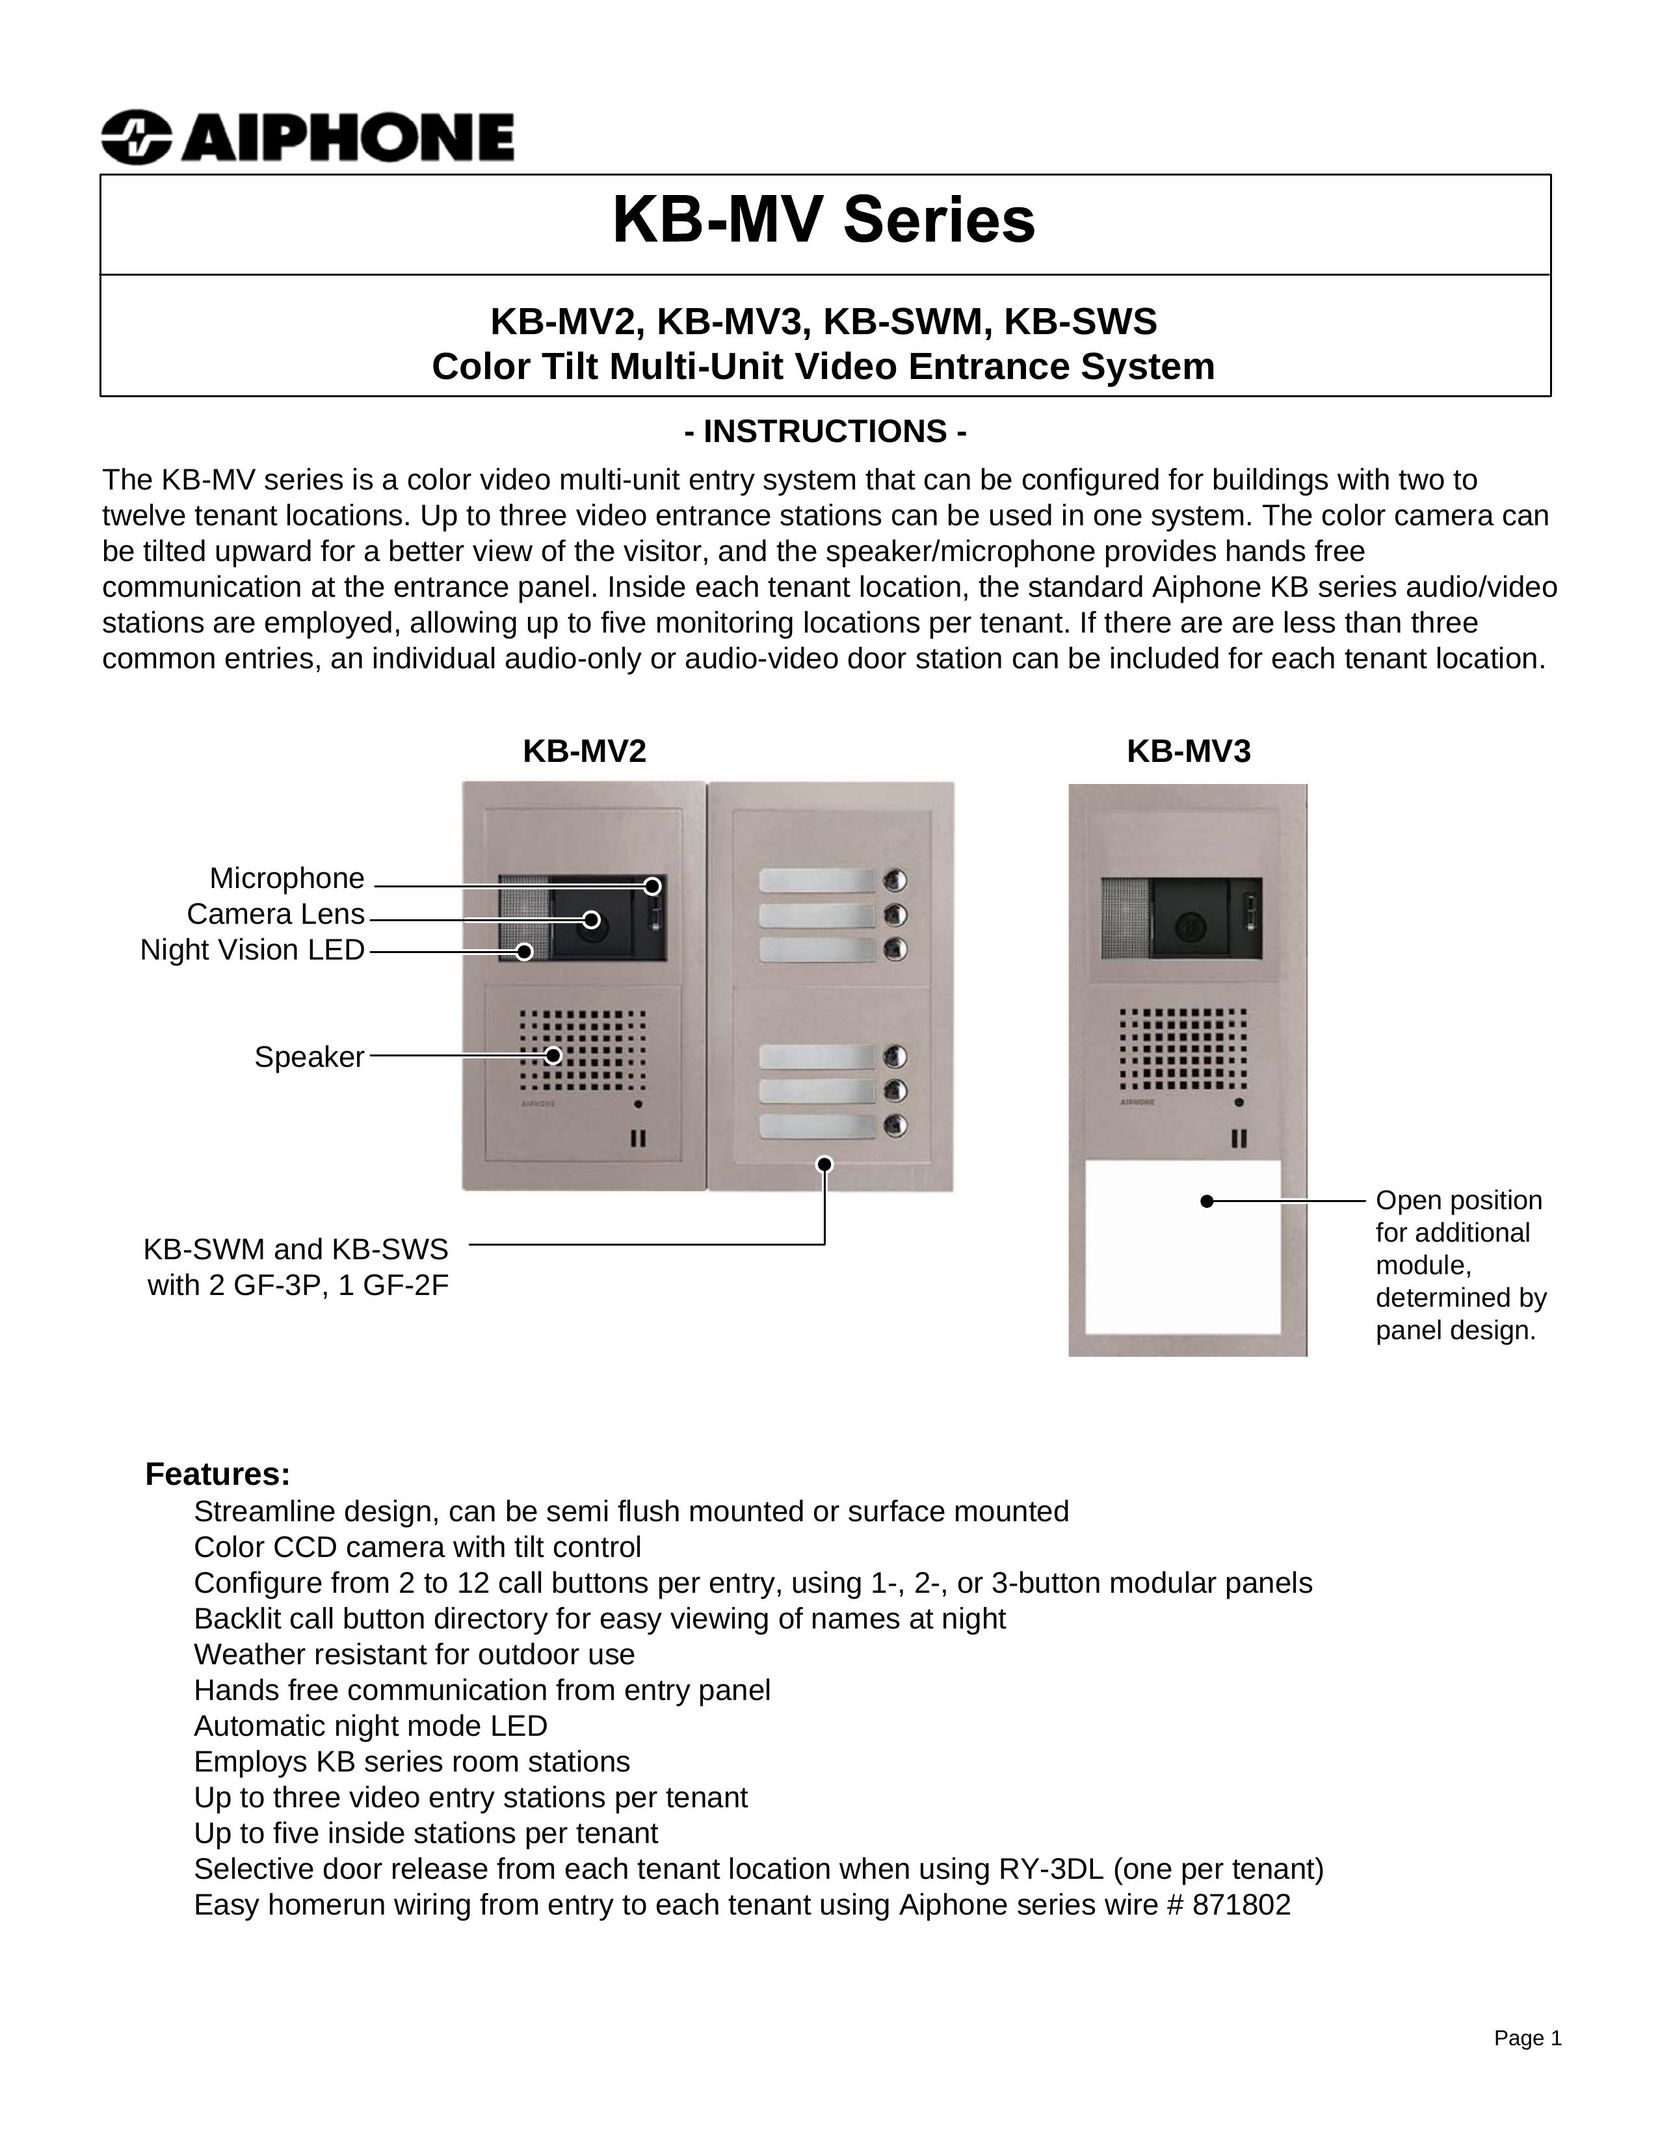 Aiphone KB-SWS Car Video System User Manual